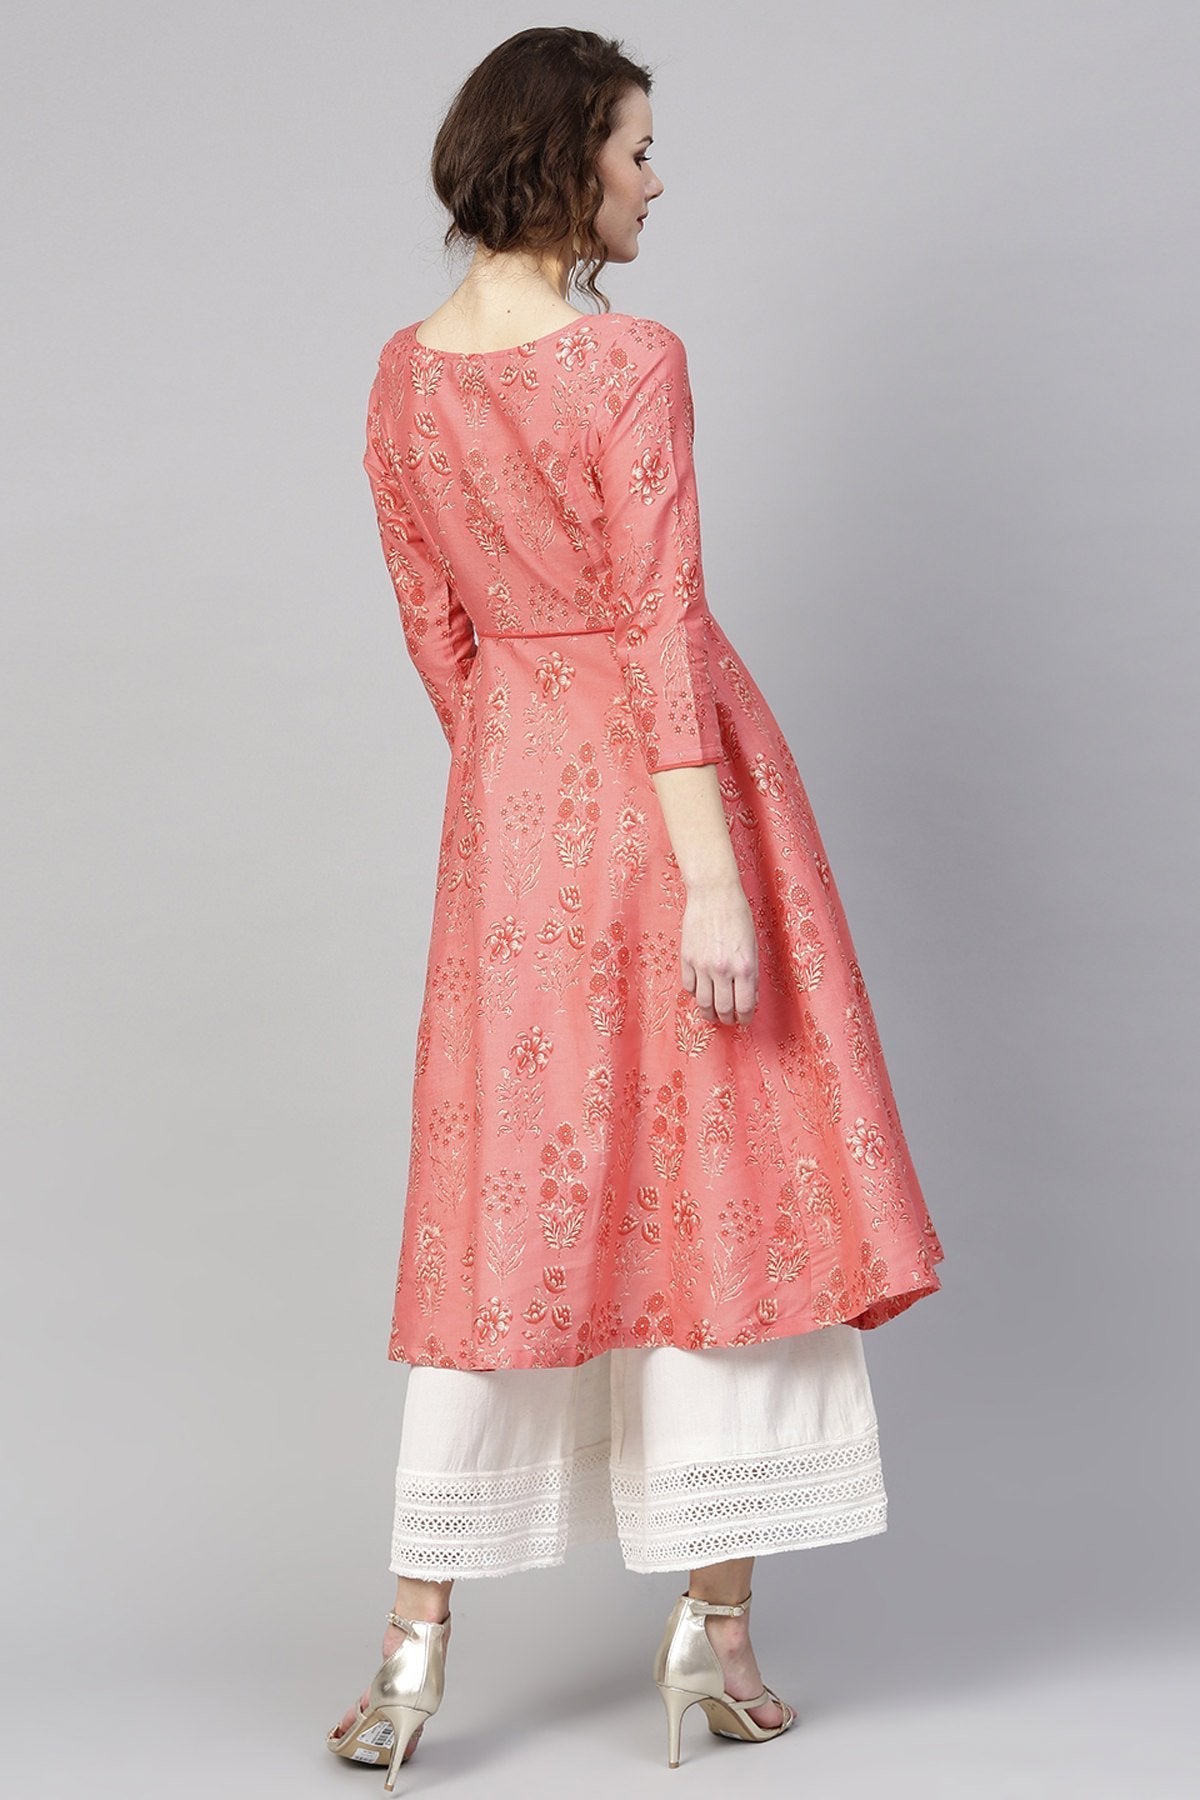 Women's Coral Floral Piping Anarkali - SHAE